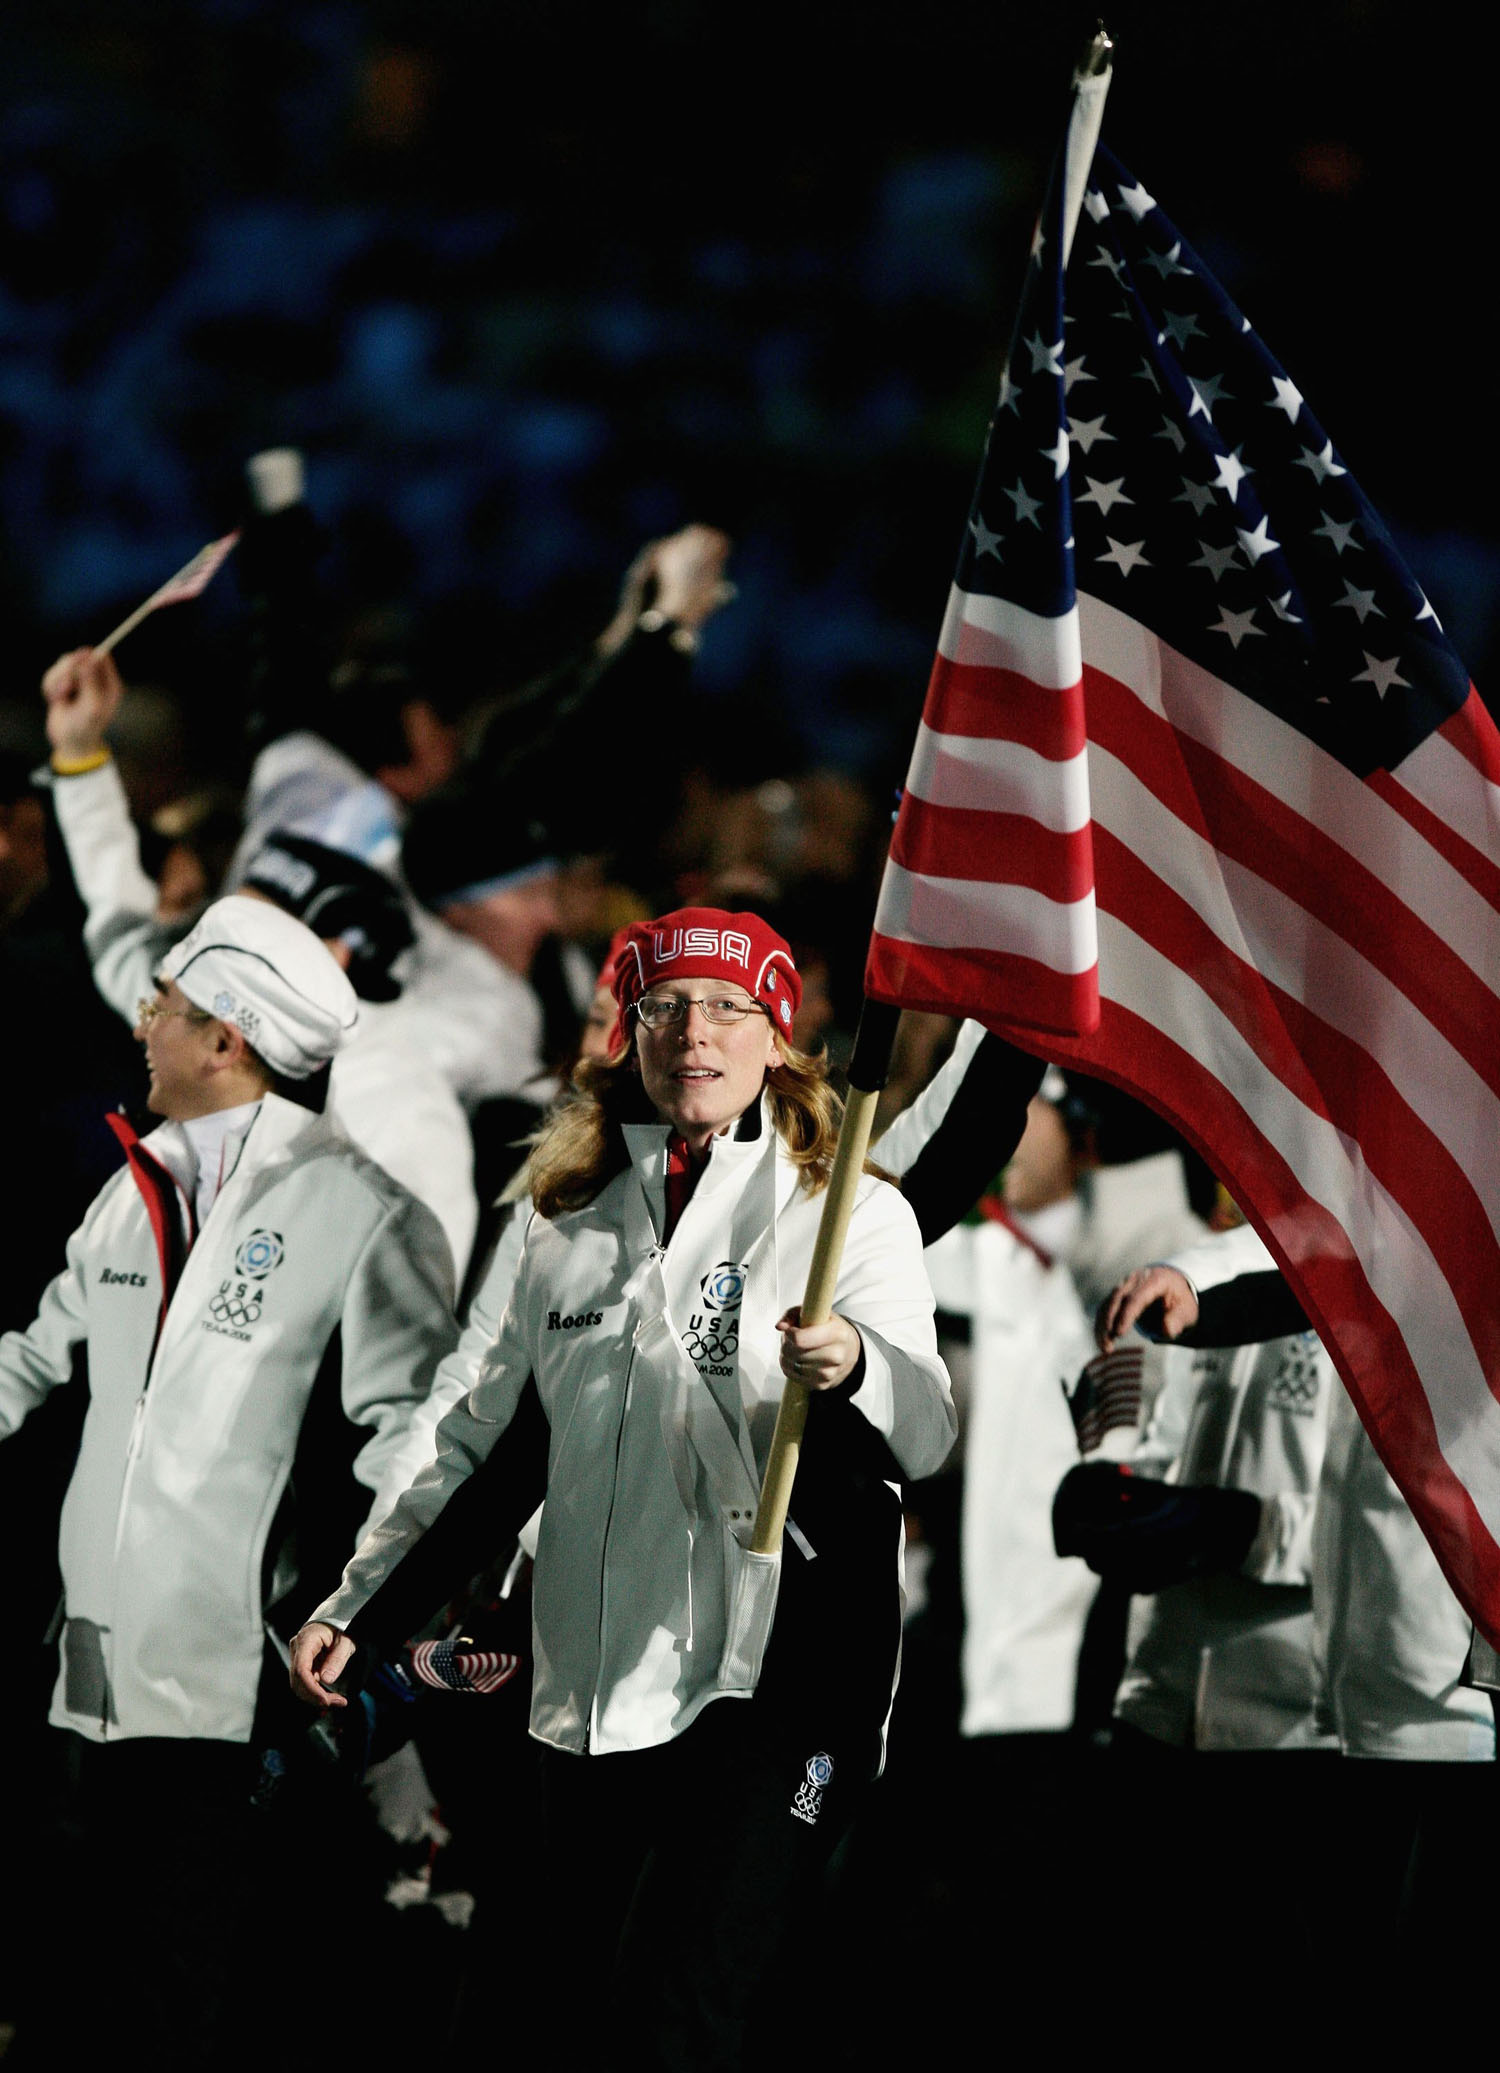 Speed skater Chris Witty carries the US flag as she and her teammates attend the opening ceremony of the Turin Winter Olympic Games on Feb. 10, 2006.